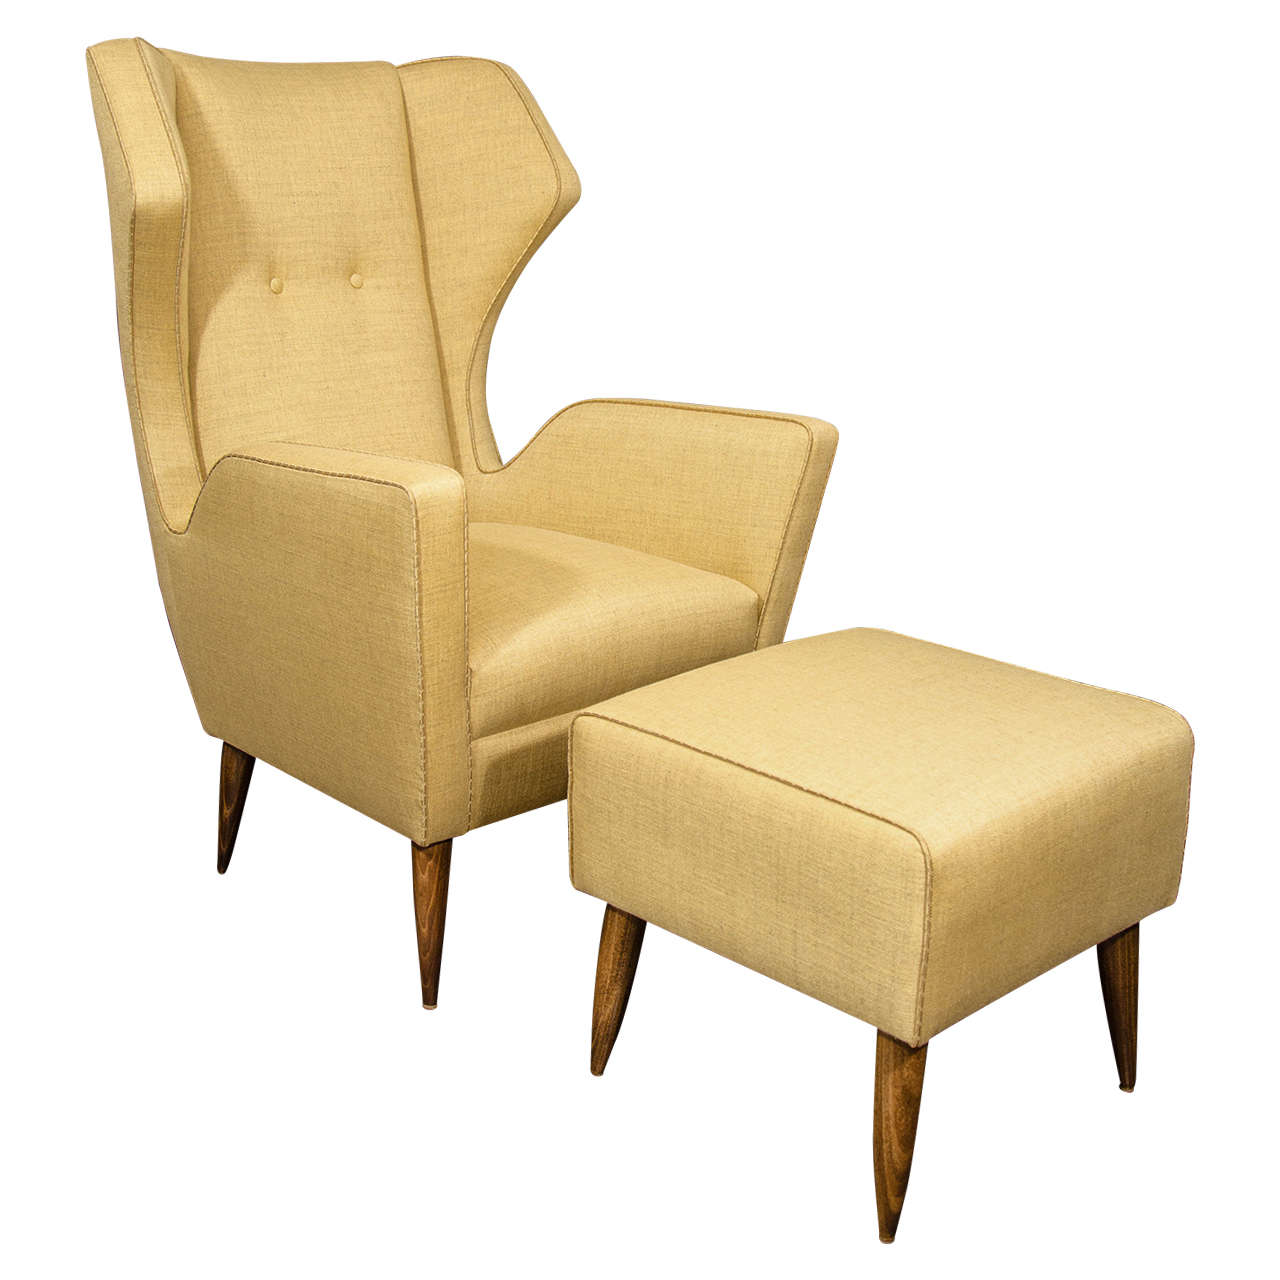 Custom Gio Ponti Style Chair and Ottoman in Mustard Color